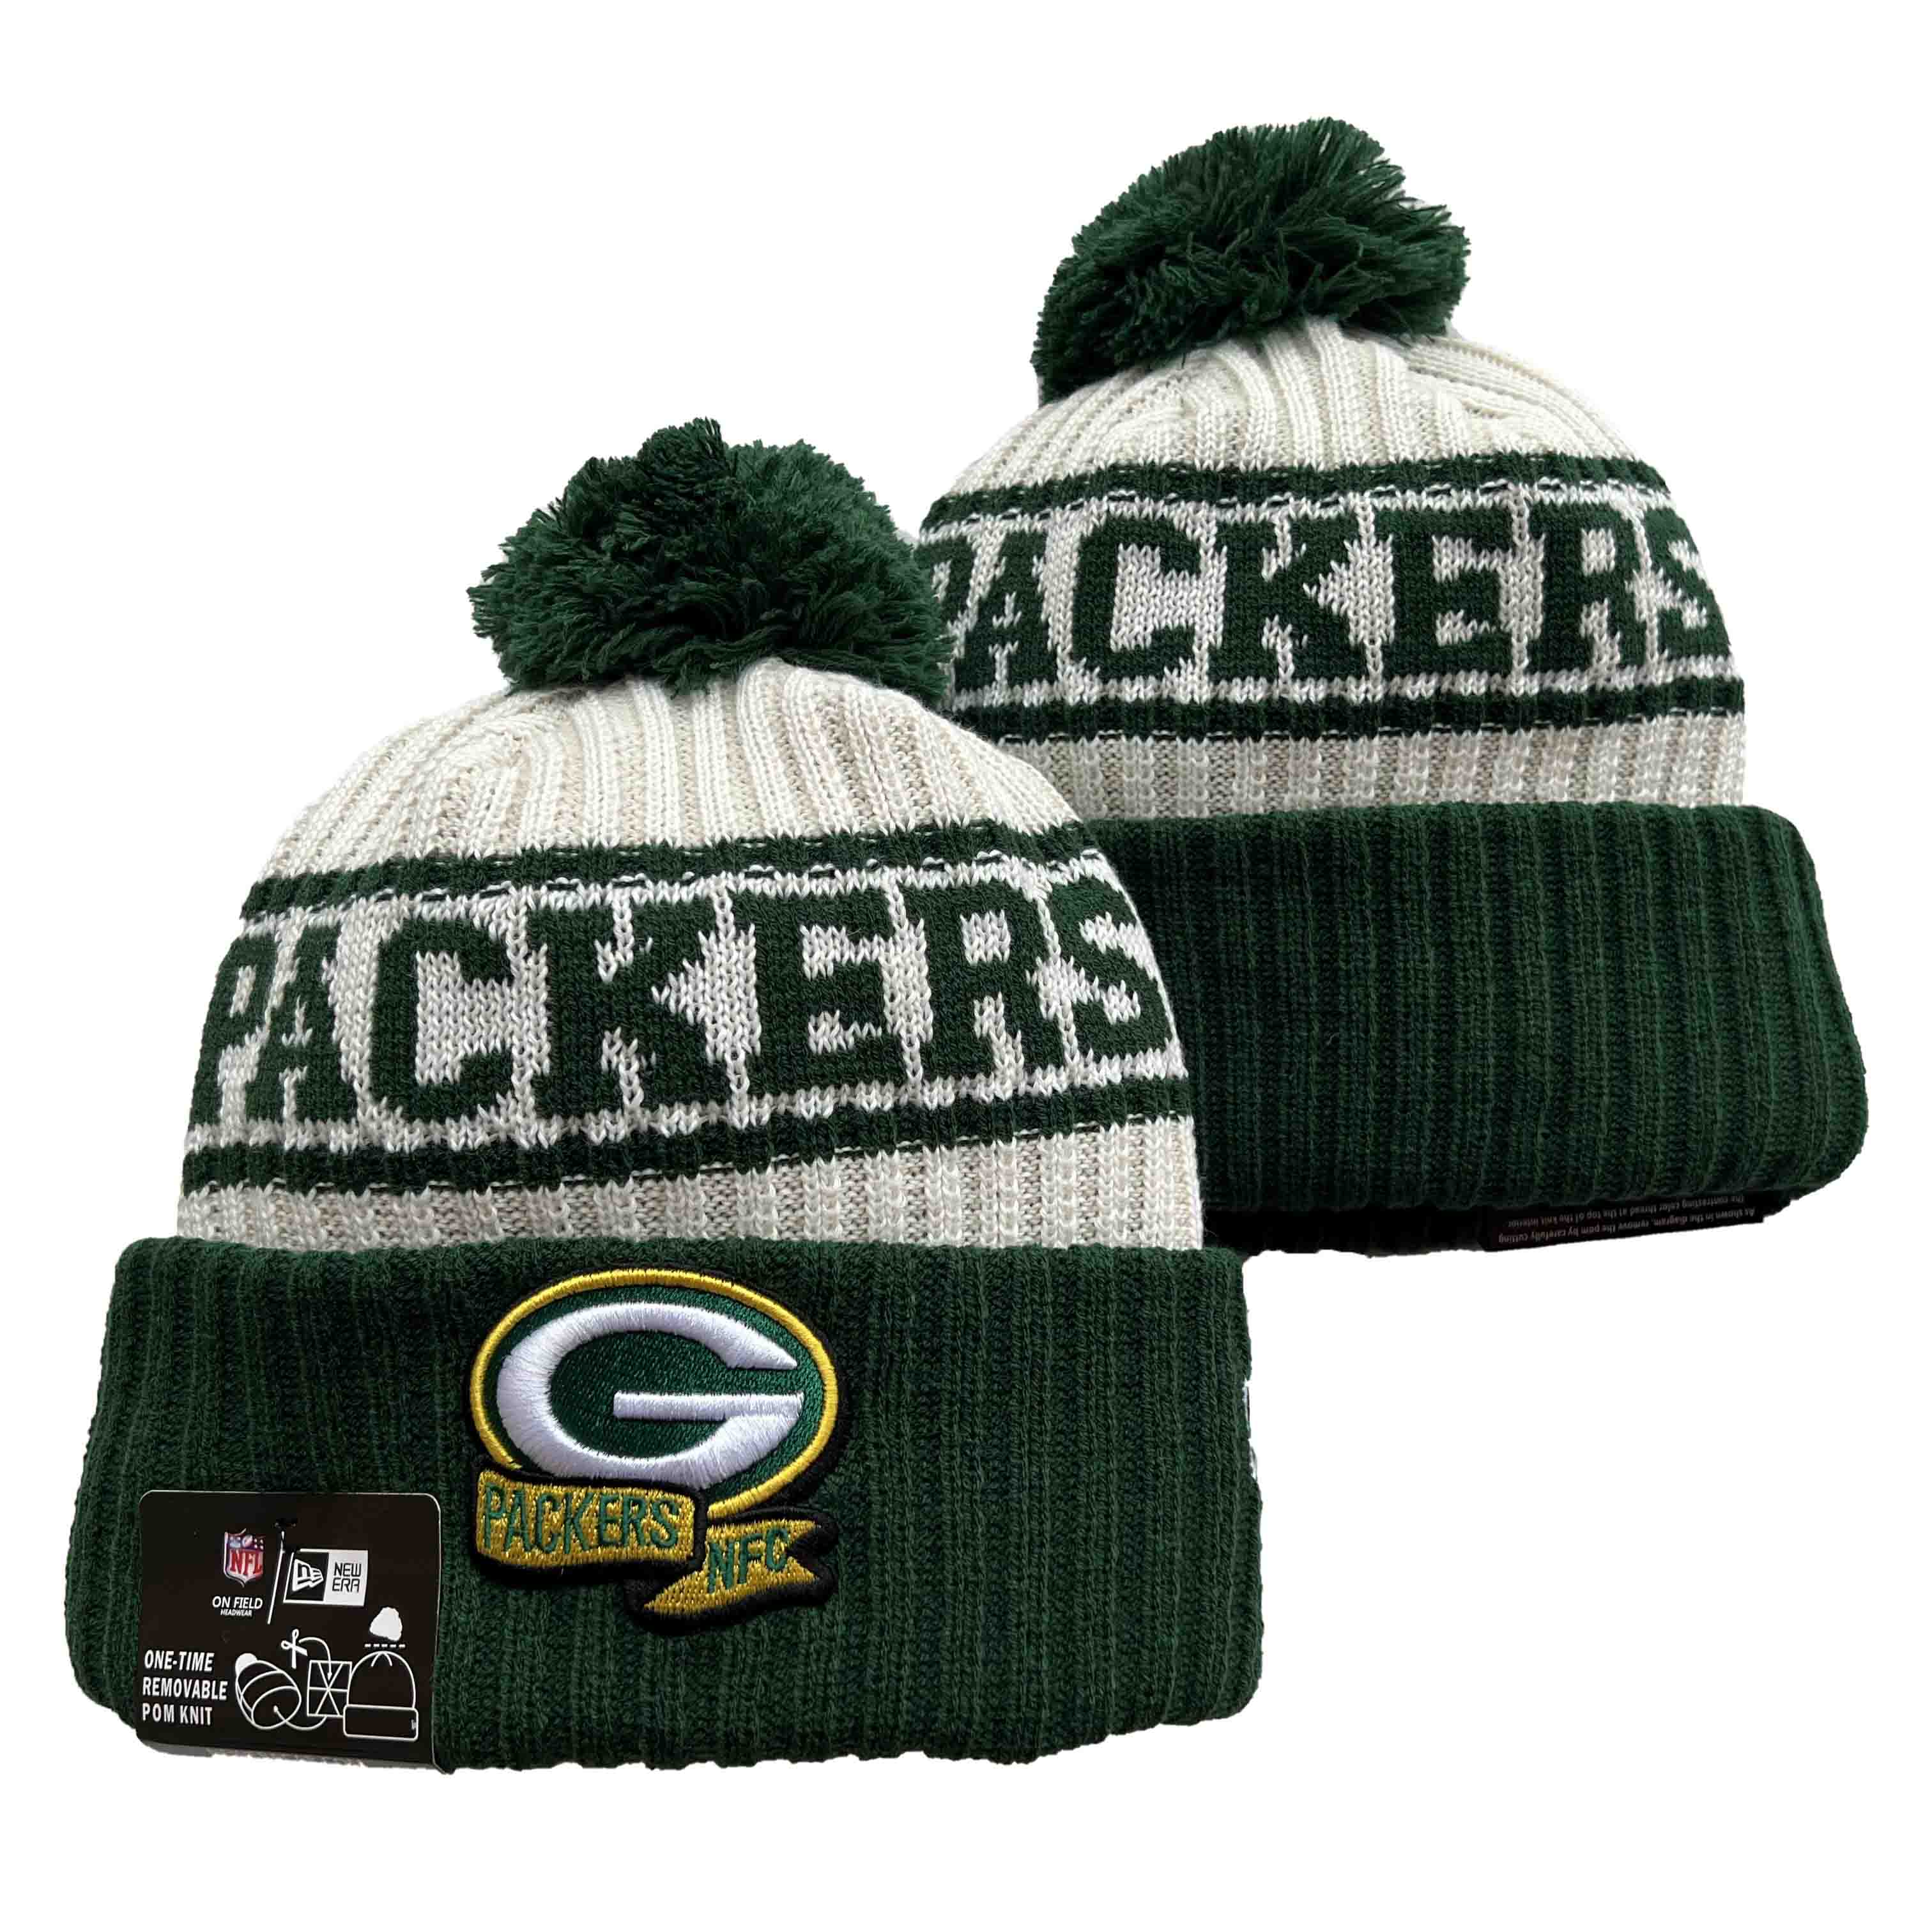 NFL Green Bay Packers Beanies Knit Hats-YD1179